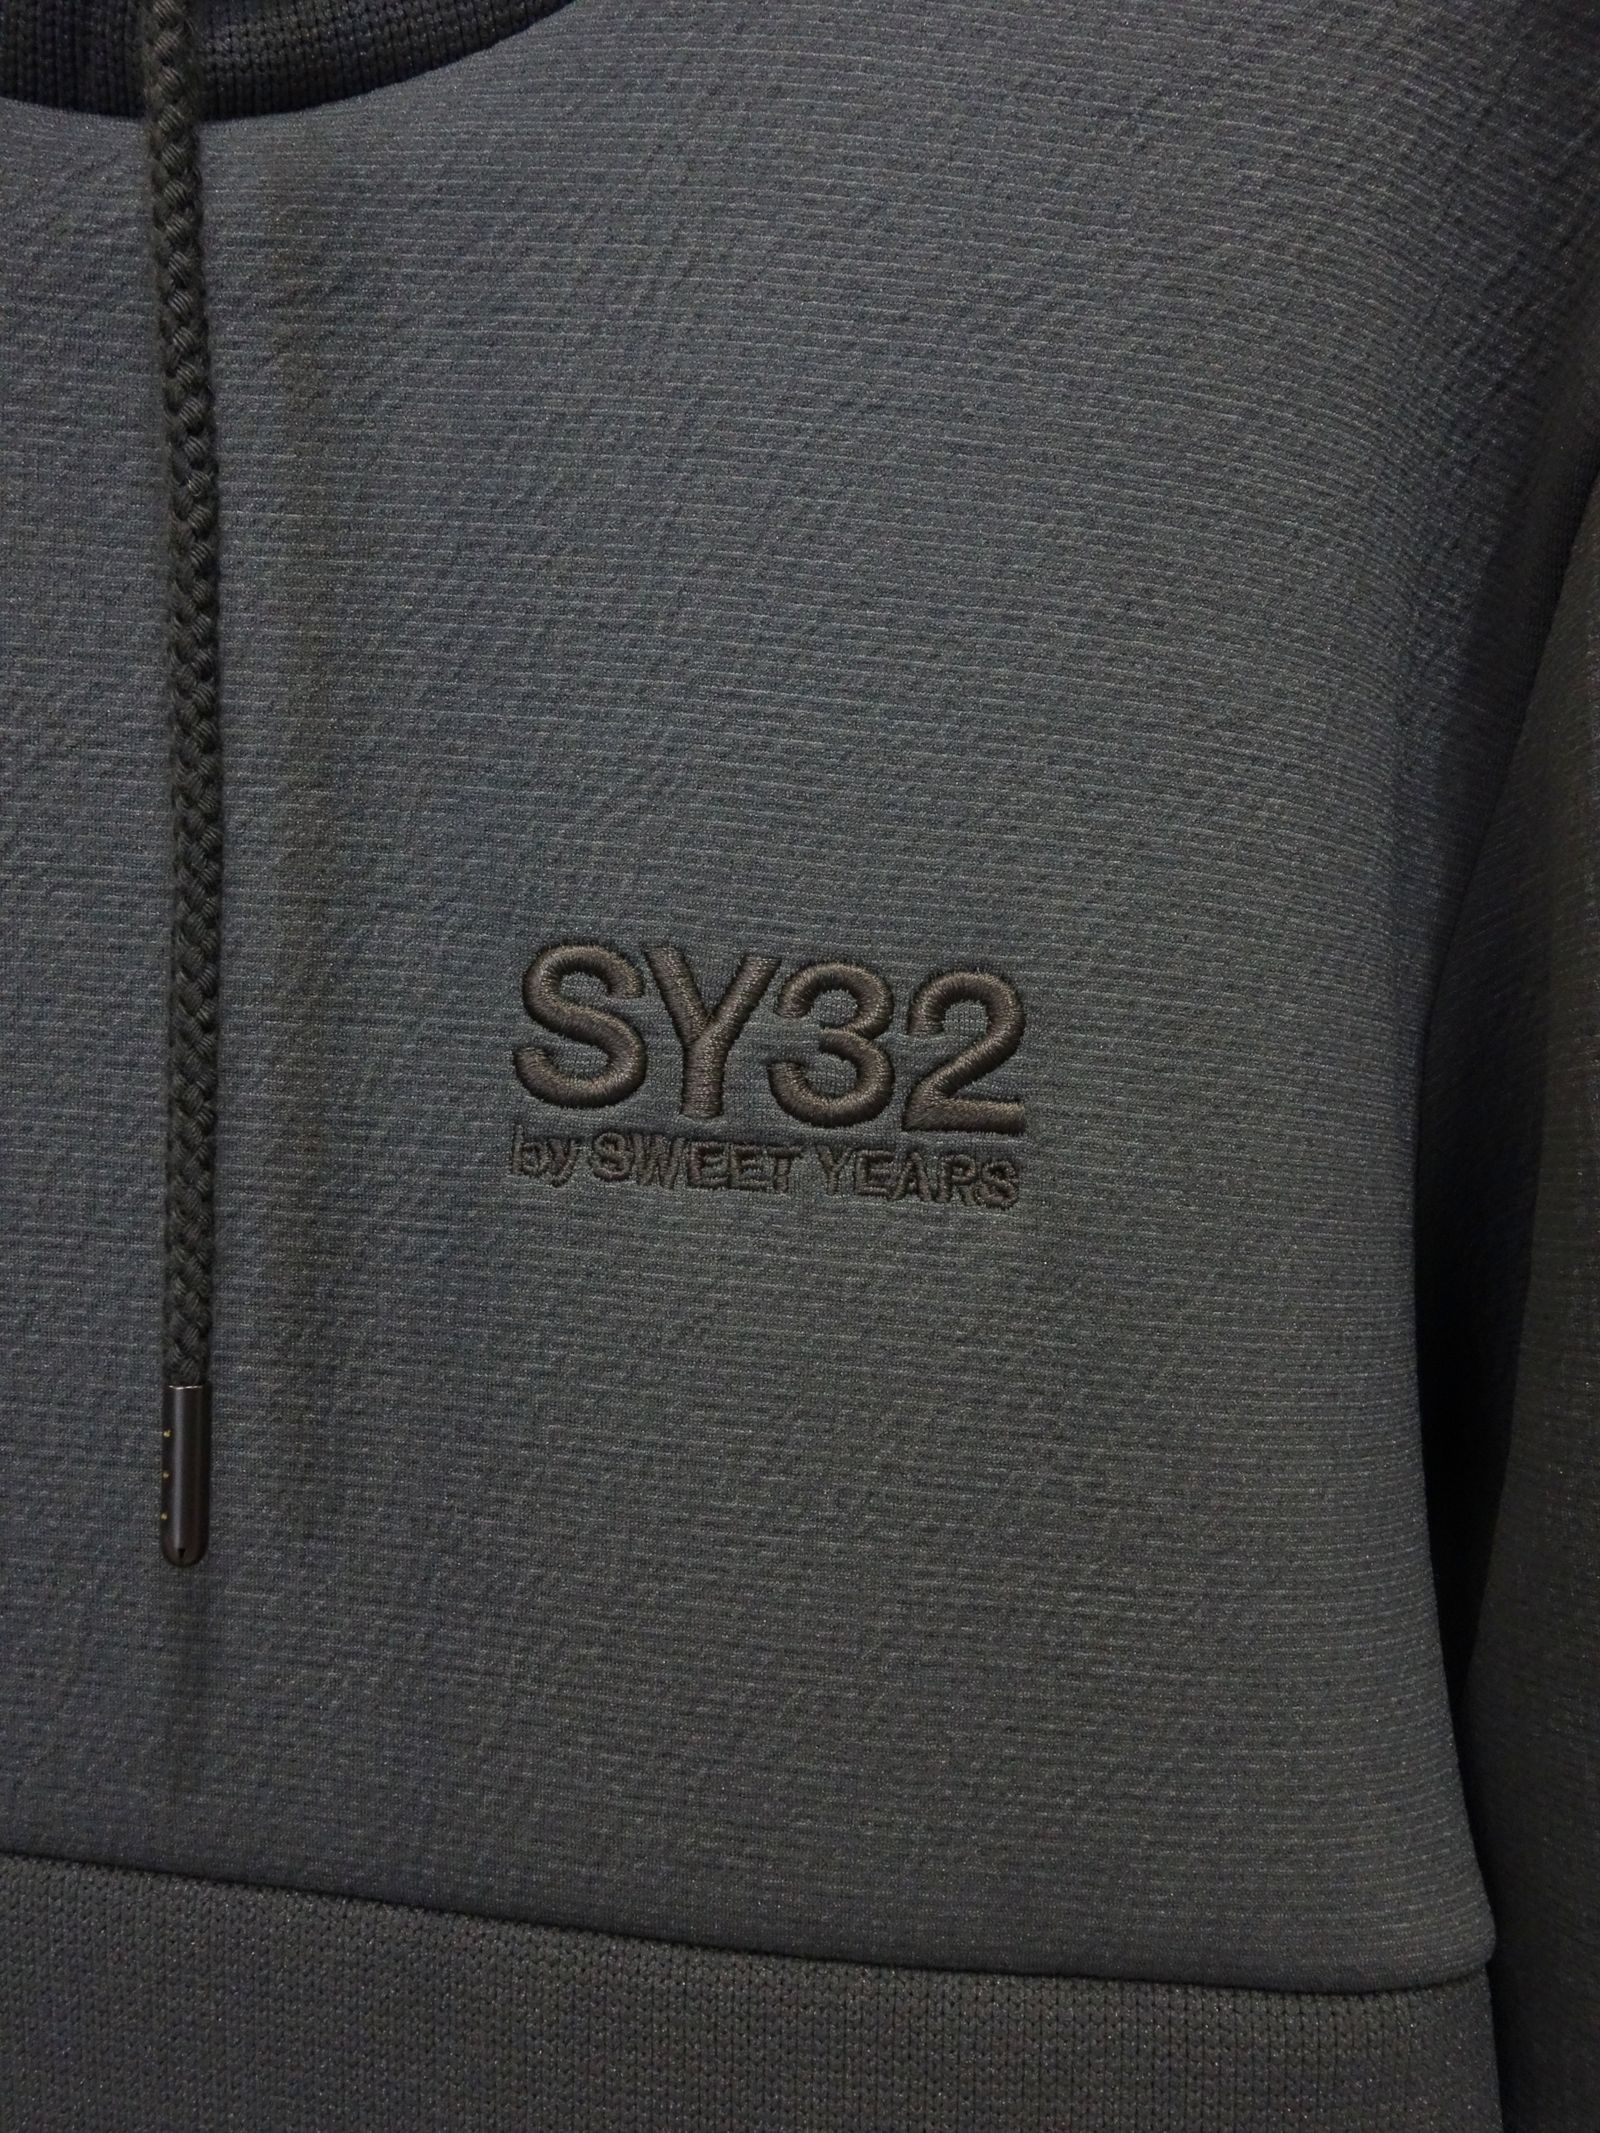 SY32 by SWEET YEARS - TWO FACE KNIT HOODIE / 10510 / パーカー | LUKE